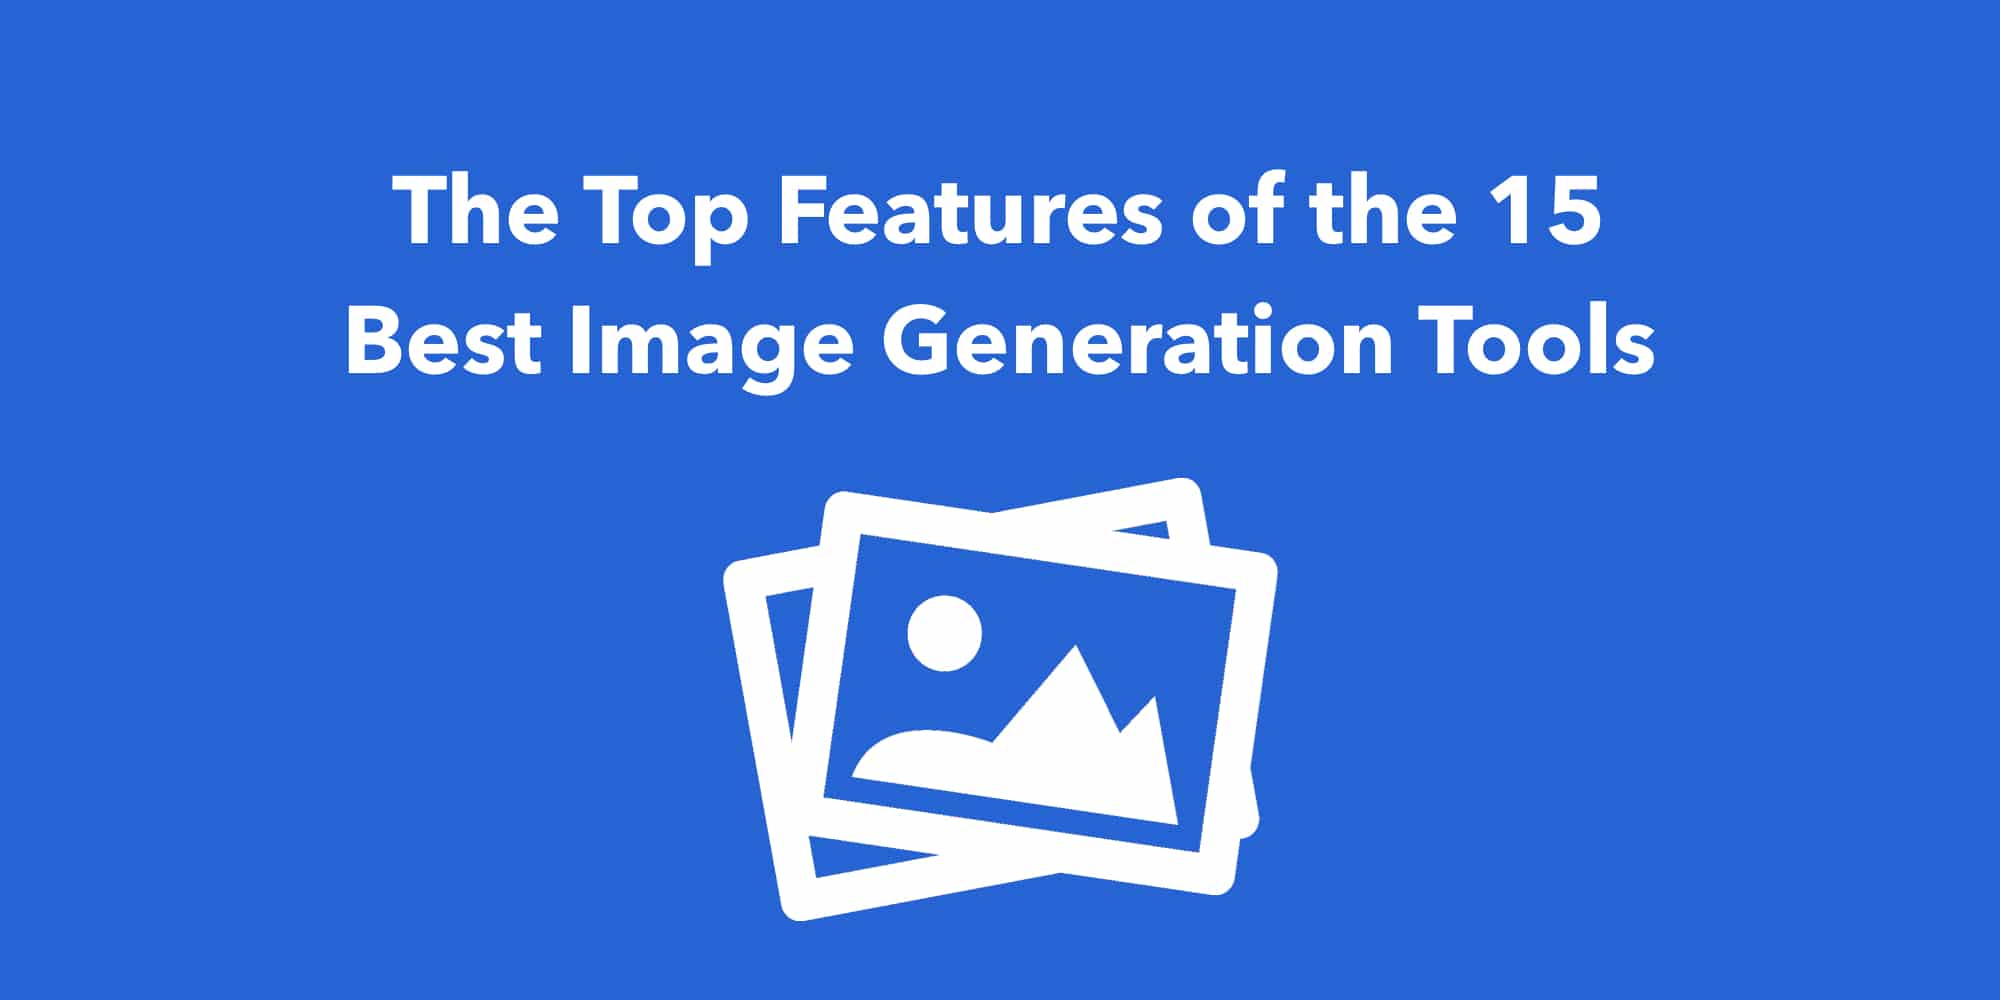 The Top Features of the 15 Best Image Generation Tools